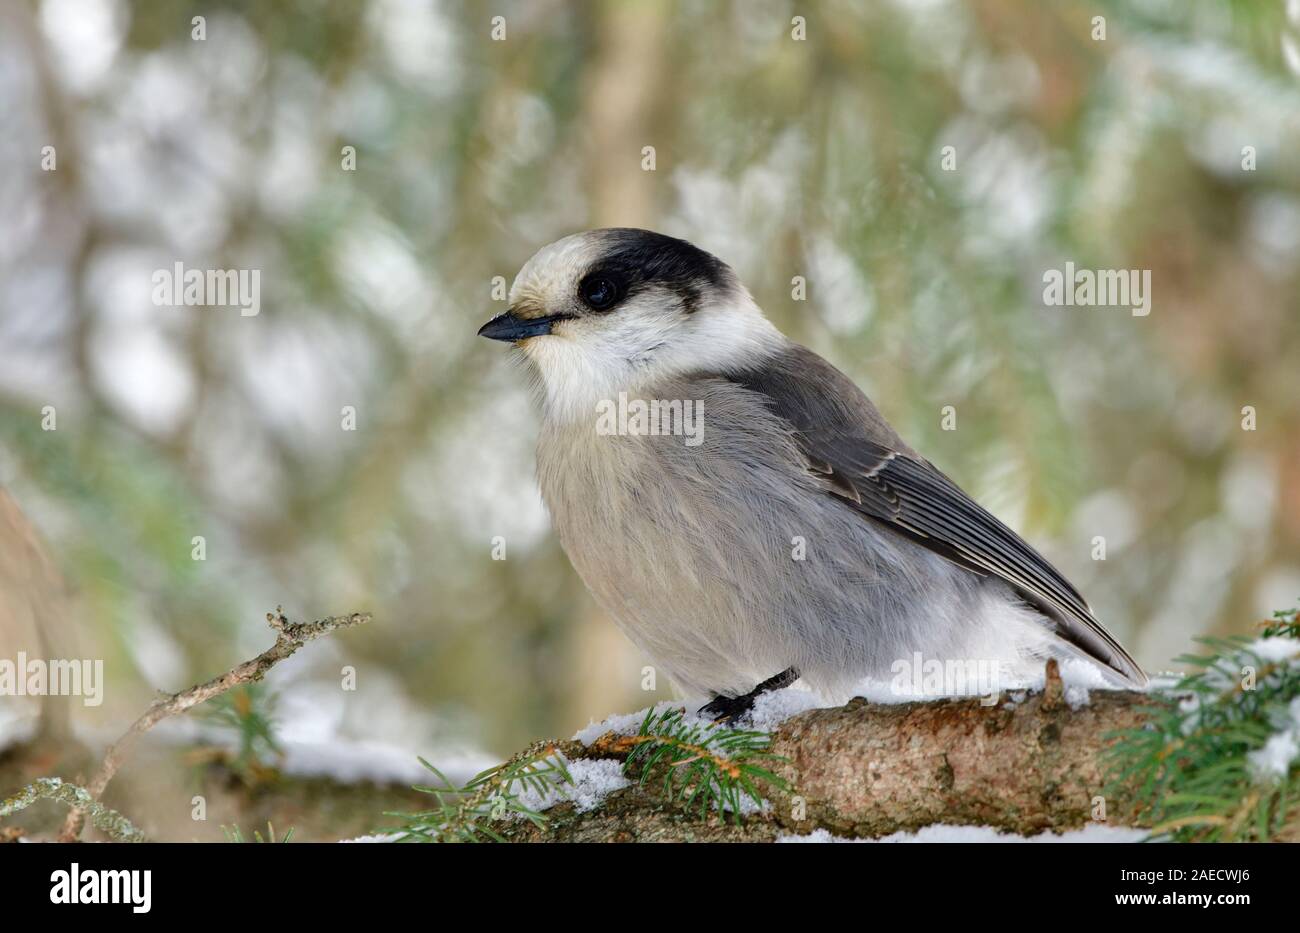 A wild Canada Jay in winter plumage perched on a spruce tree branch in rural Alberta Canada. Stock Photo